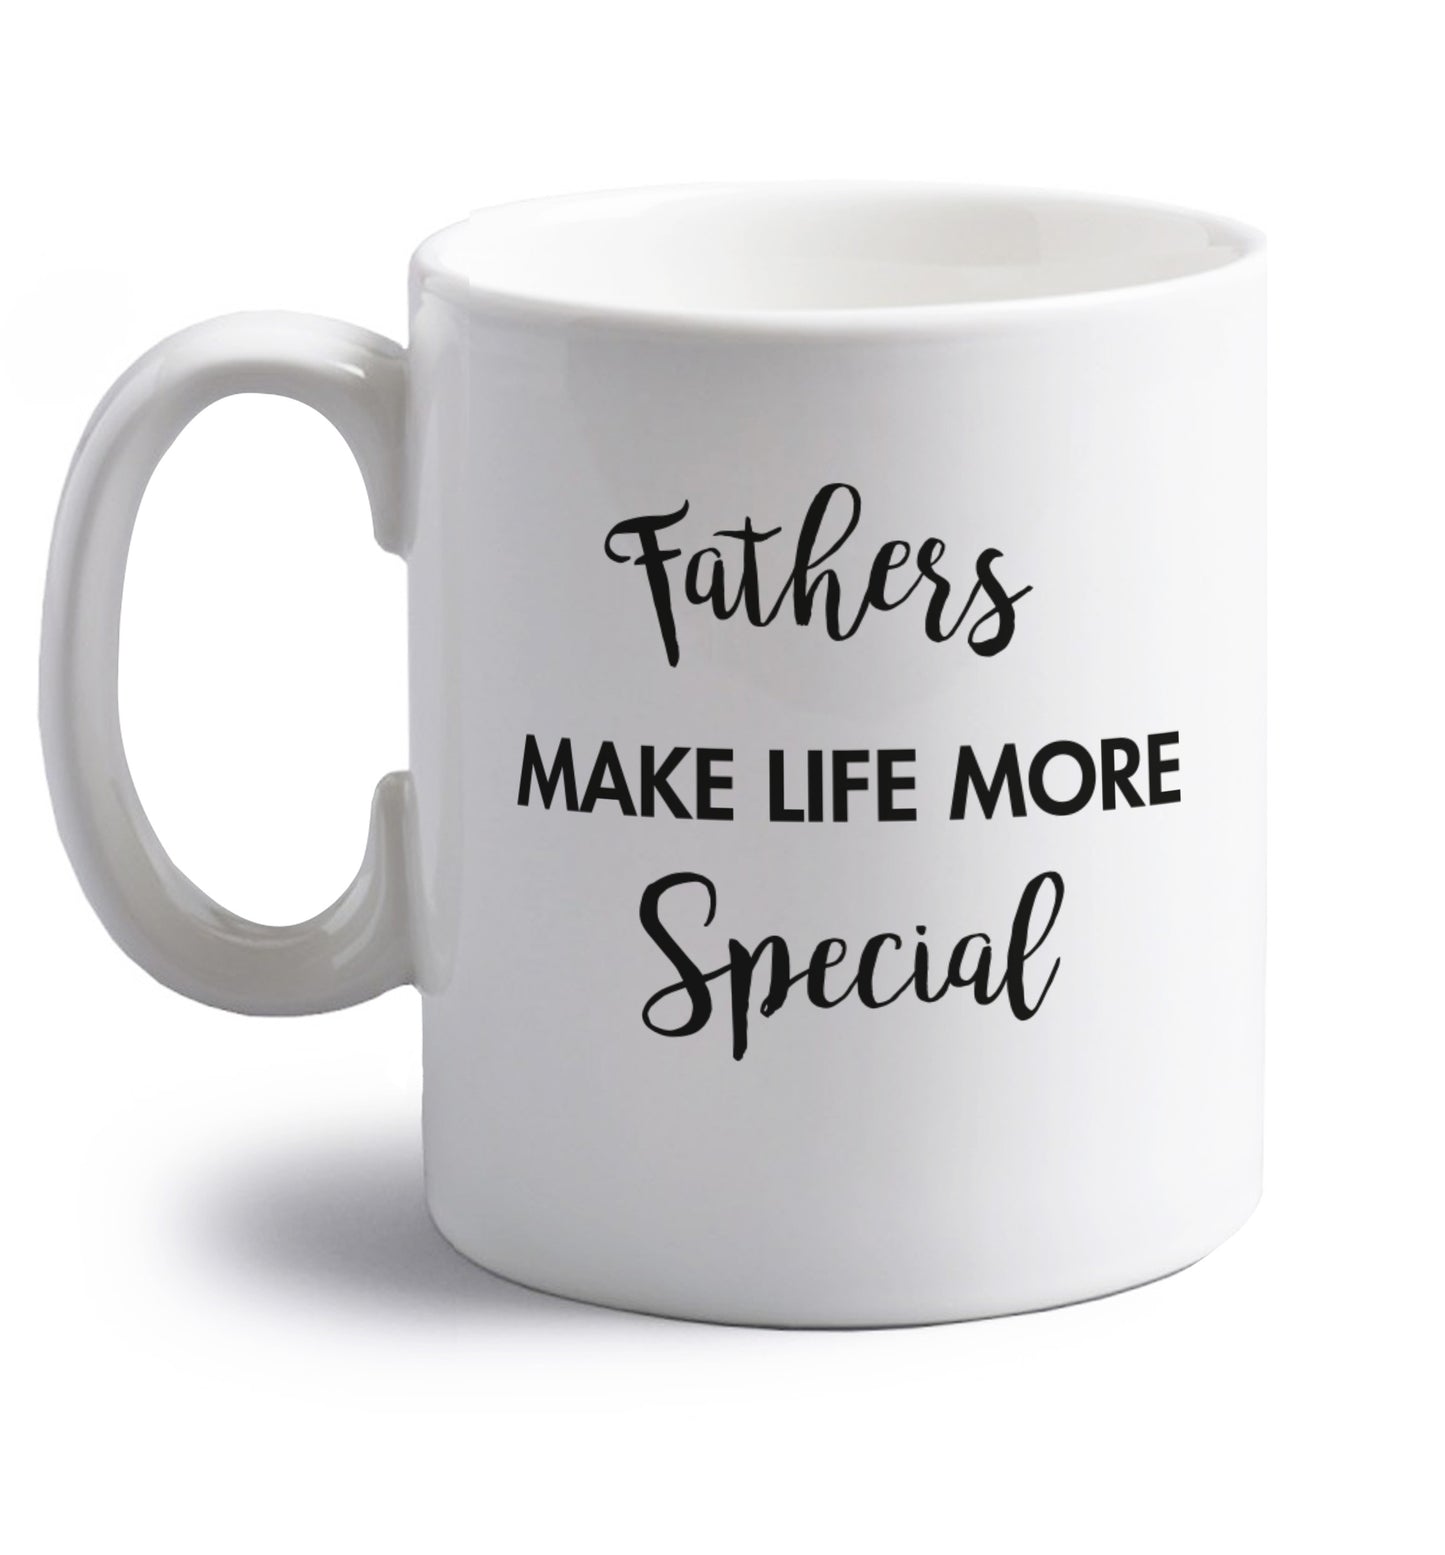 Fathers make life more special right handed white ceramic mug 